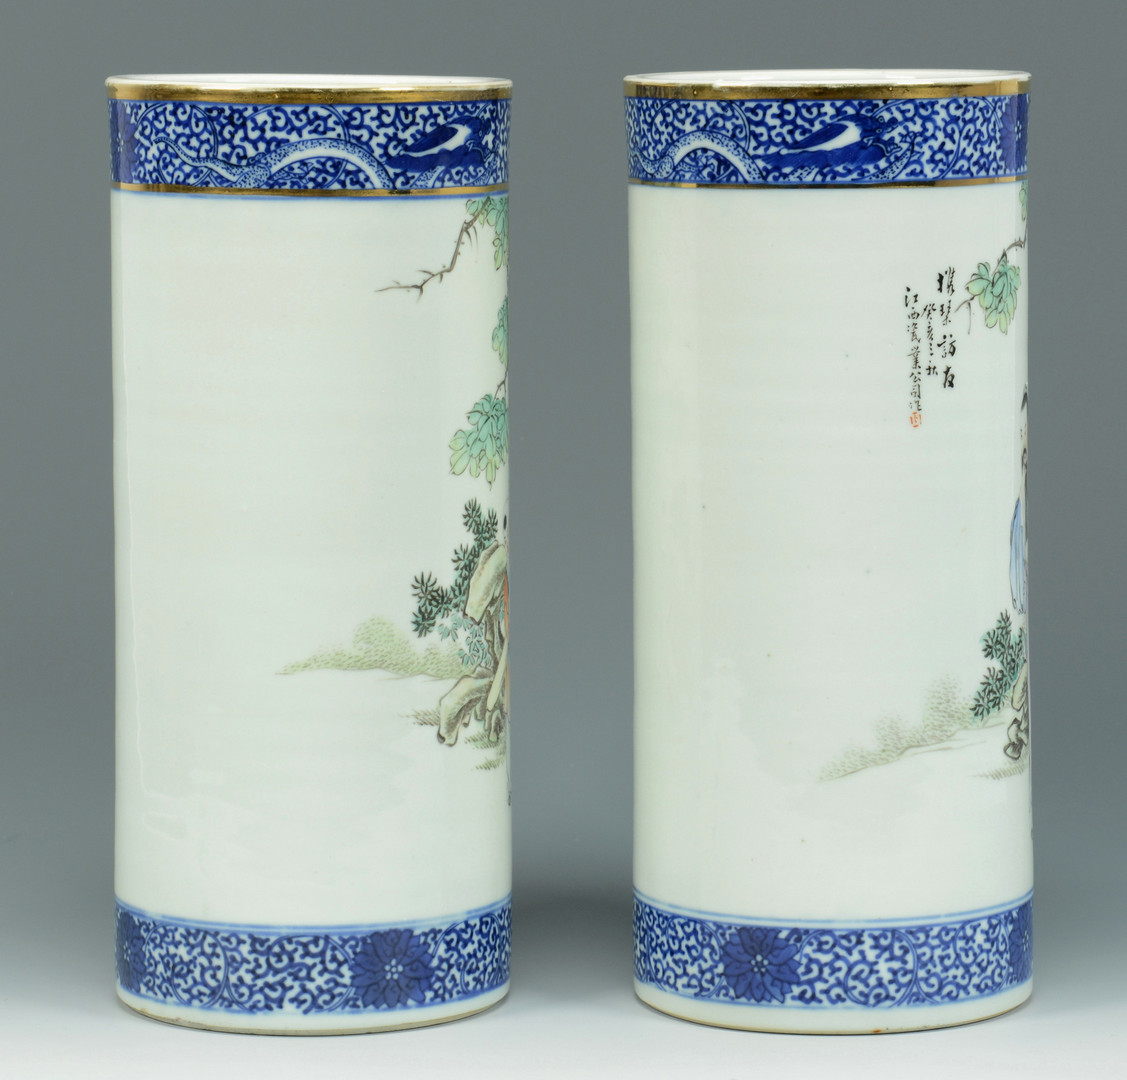 Lot 495: Pair of Chinese Poem Hat Stands